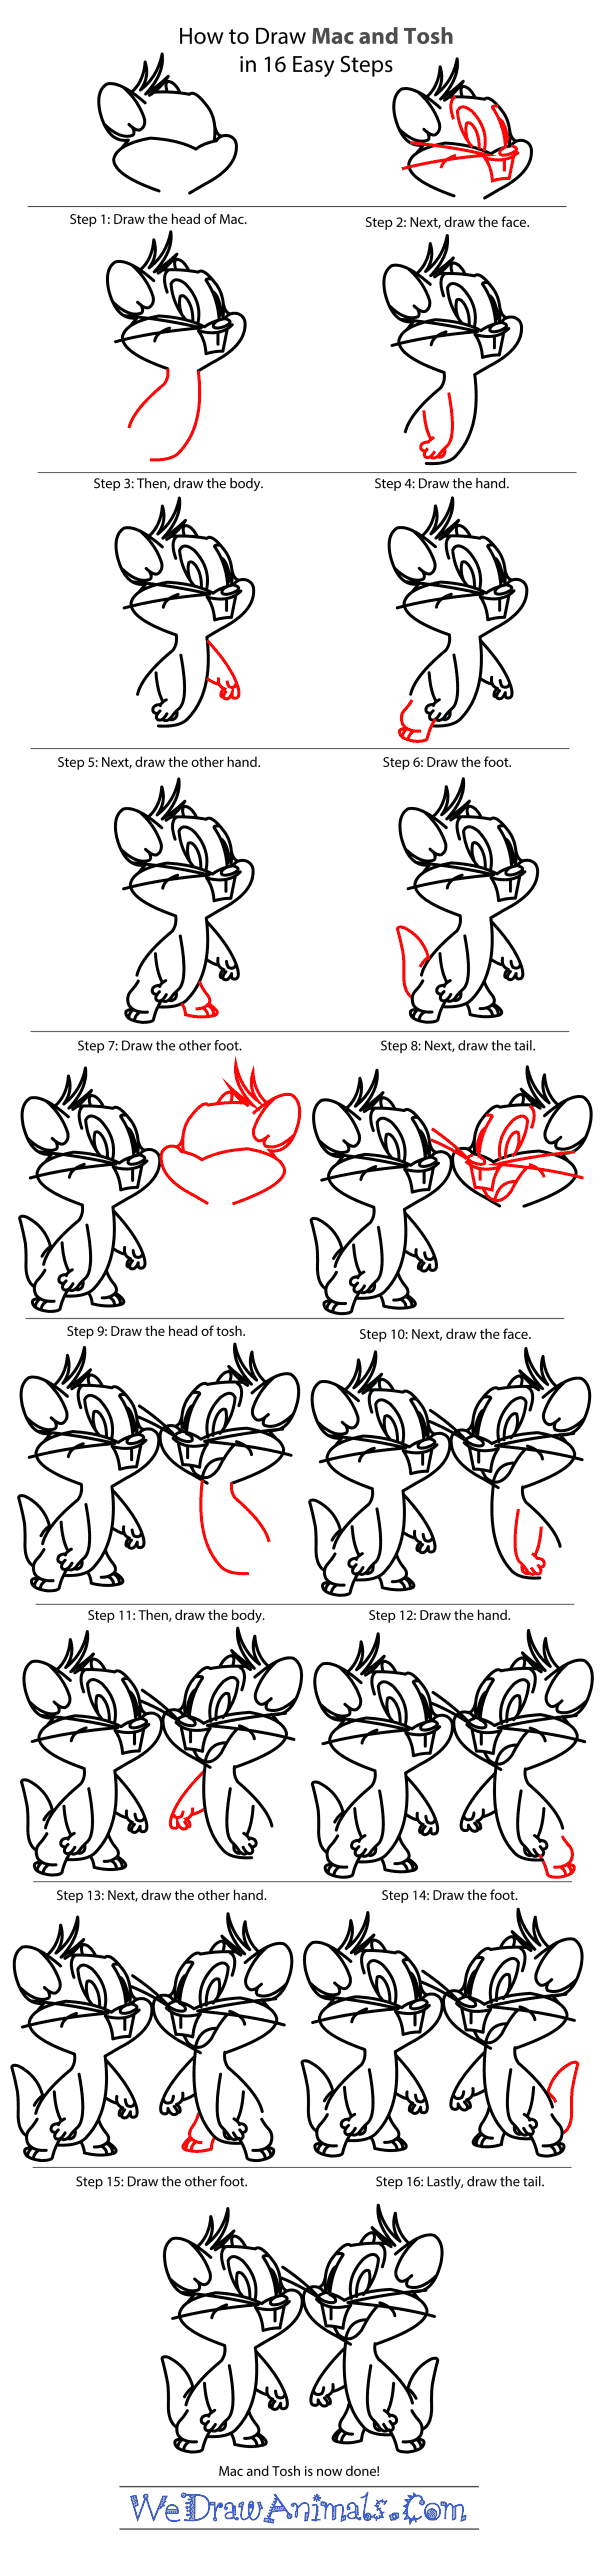 How to Draw Mac And Tosh From Looney Tunes - Step-by-Step Tutorial